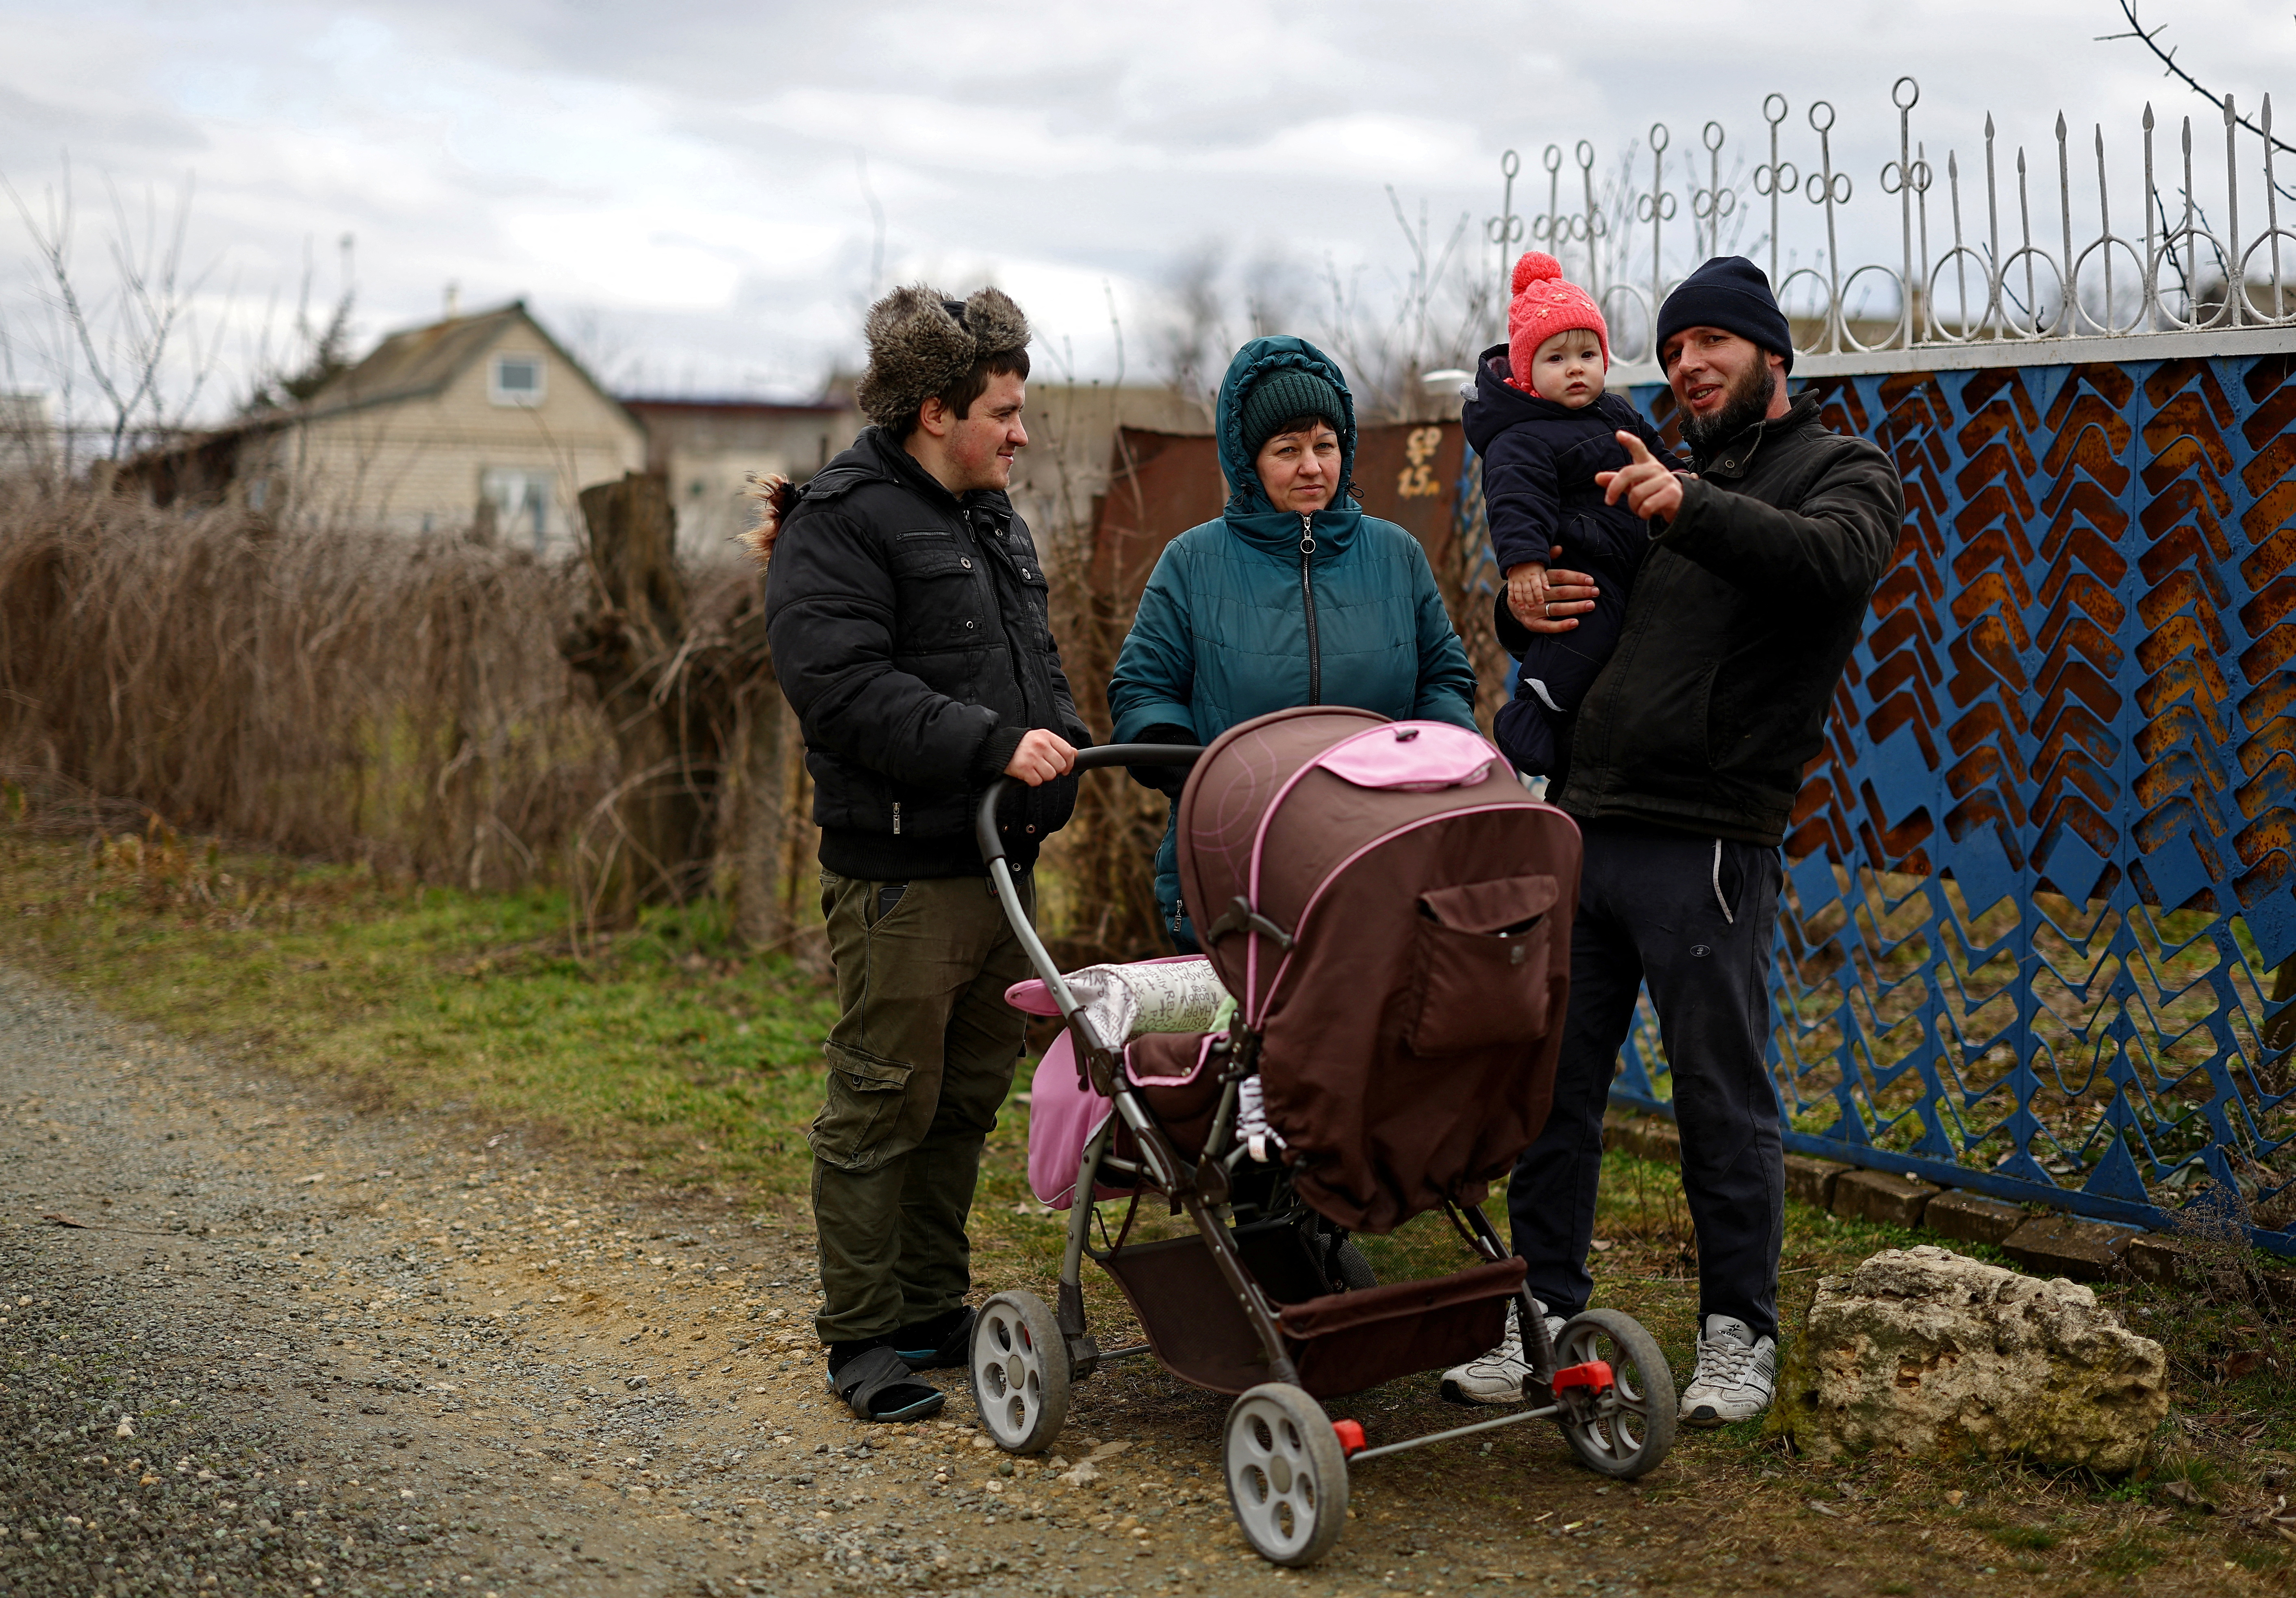 Oleksii Markelov and Natalia Lukina, who gave birth to baby Kateryna during the Russian occupation of Kherson, say Russian forces pressured other parents to register their babies as Russian citizens. Reurters/Lisi Niesner.